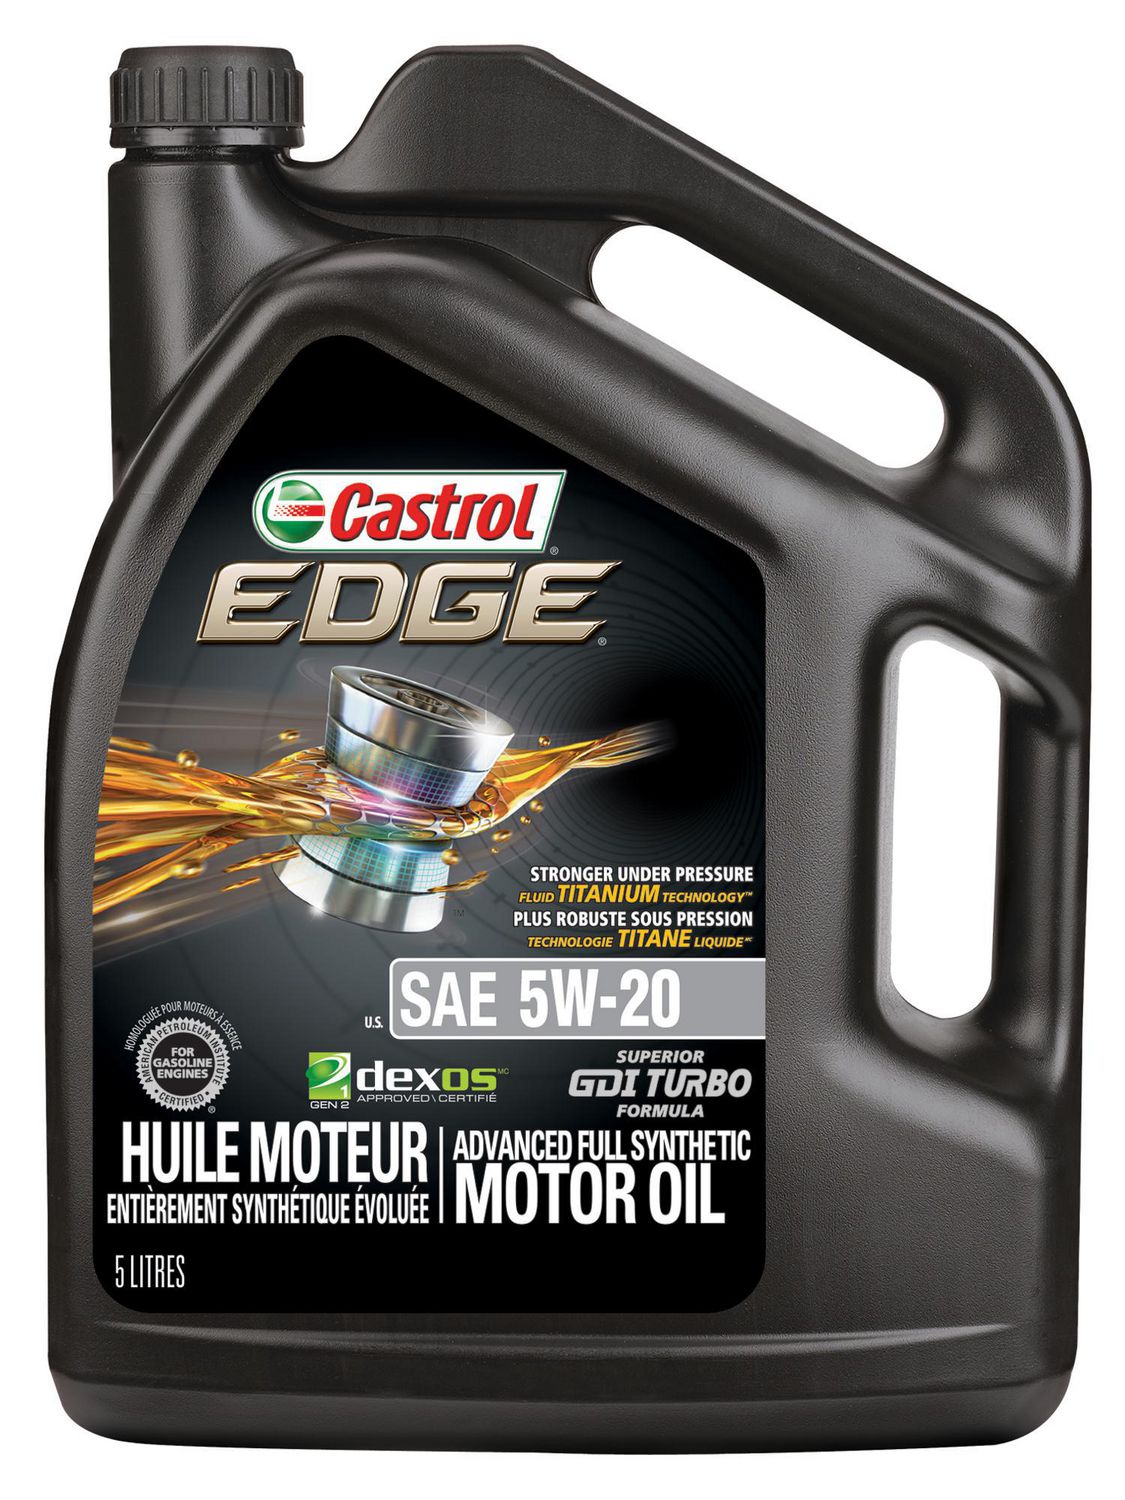 6-pack-castrol-edge-high-mileage-10w-30-advanced-full-synthetic-motor